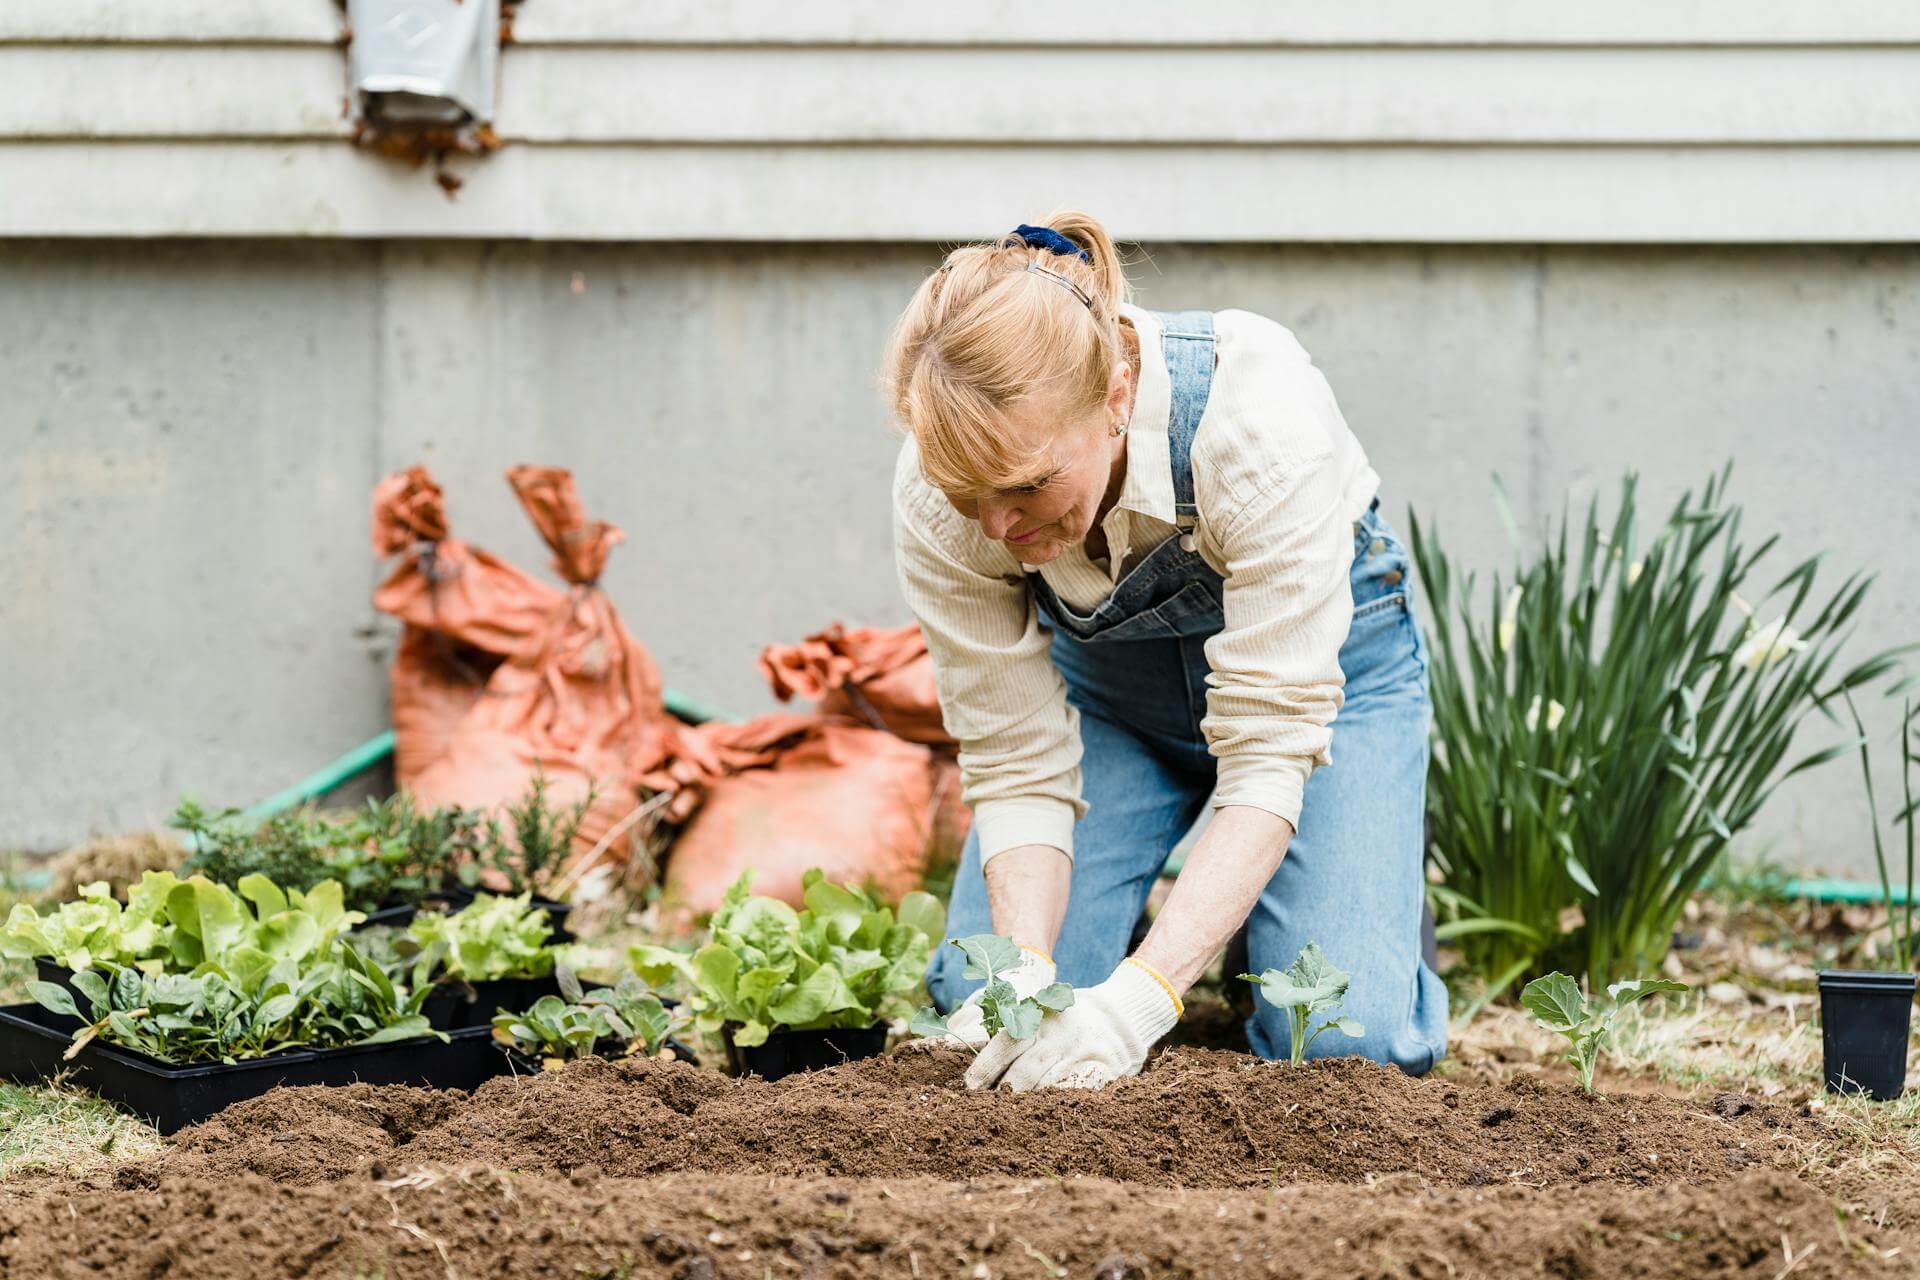 A woman wearing overalls tends to her vegetable garden.